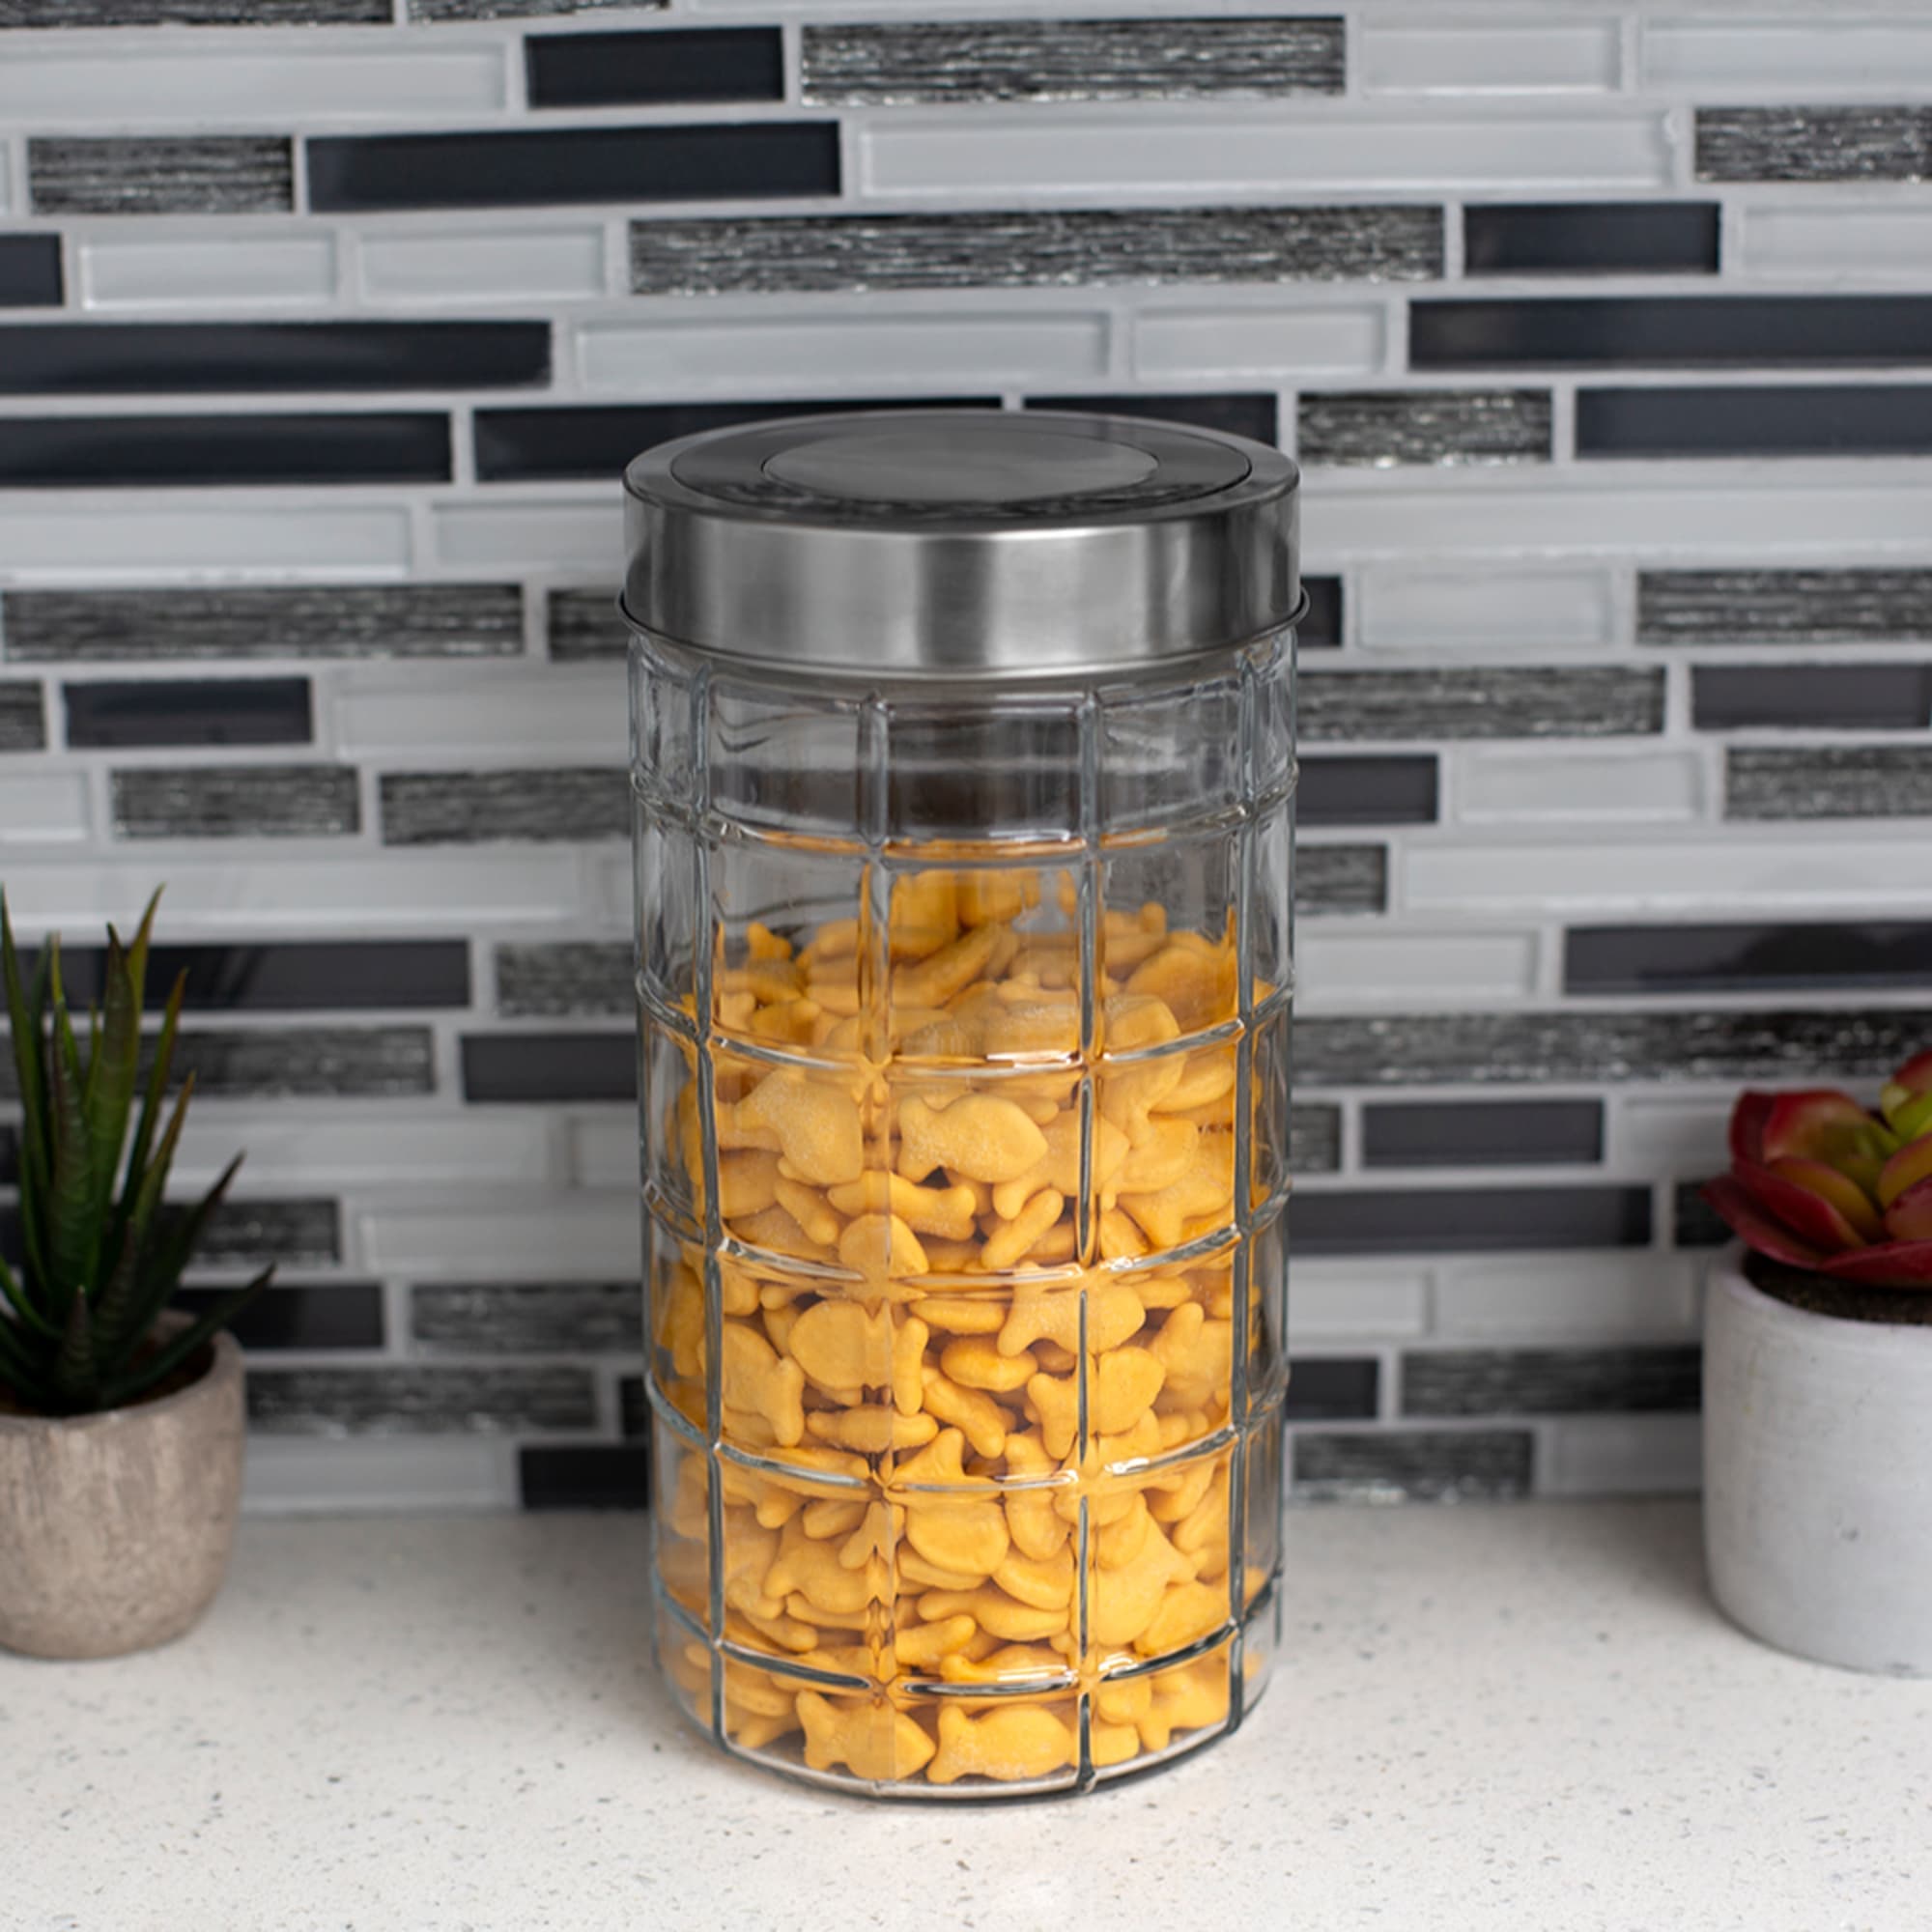 Home Basics Chex Collection 52 oz. Large Glass Canister $3.50 EACH, CASE PACK OF 12